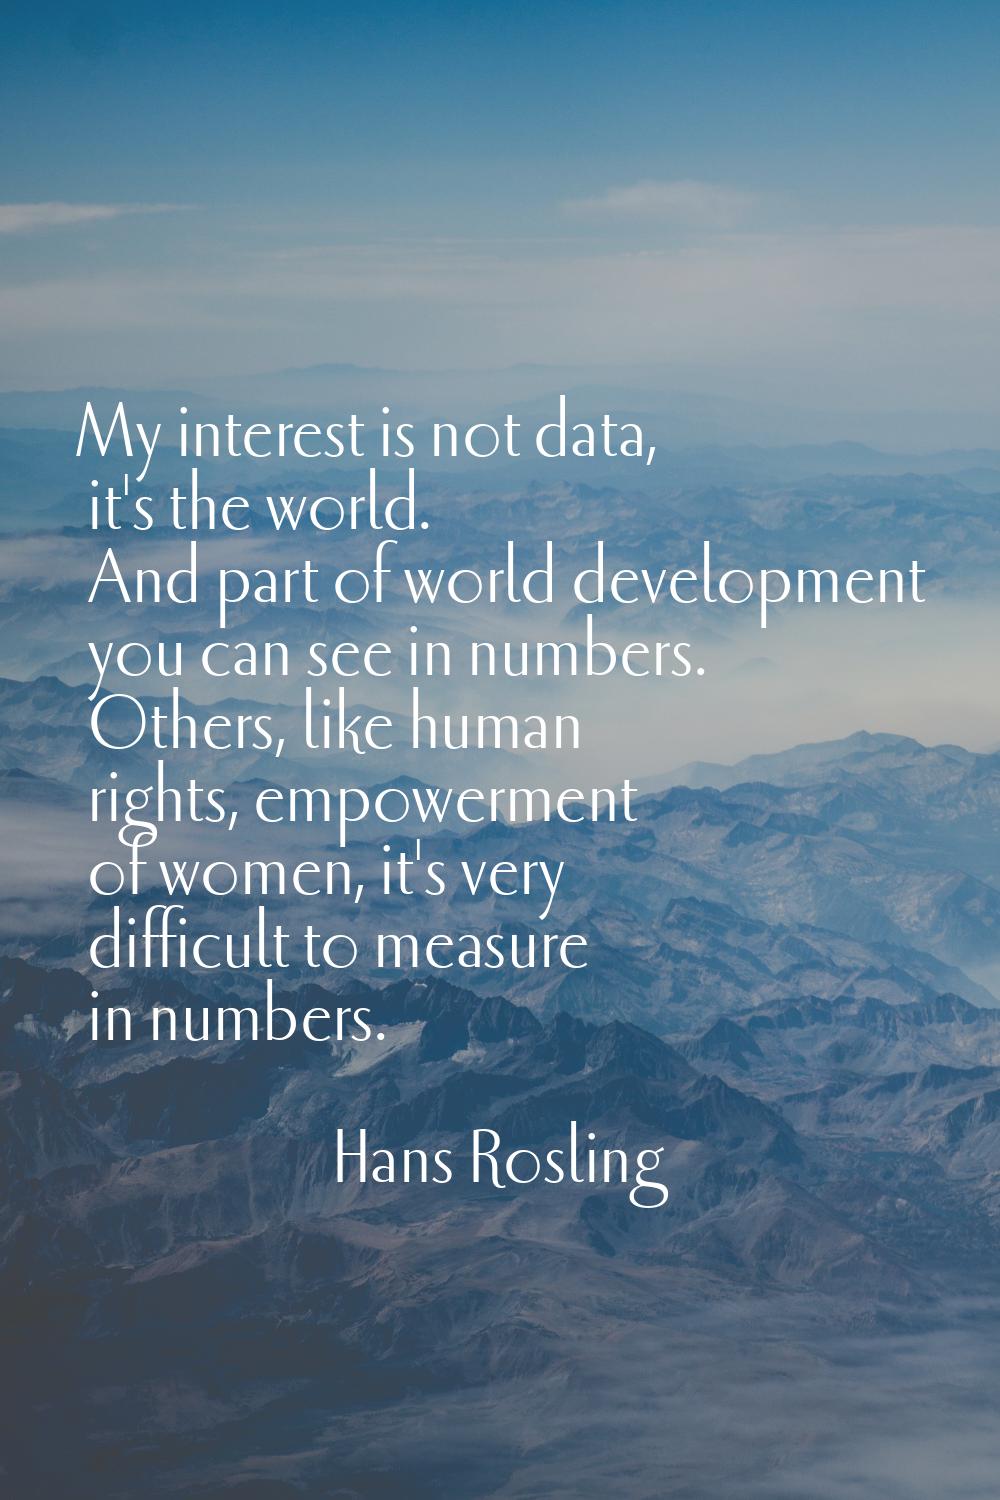 My interest is not data, it's the world. And part of world development you can see in numbers. Othe